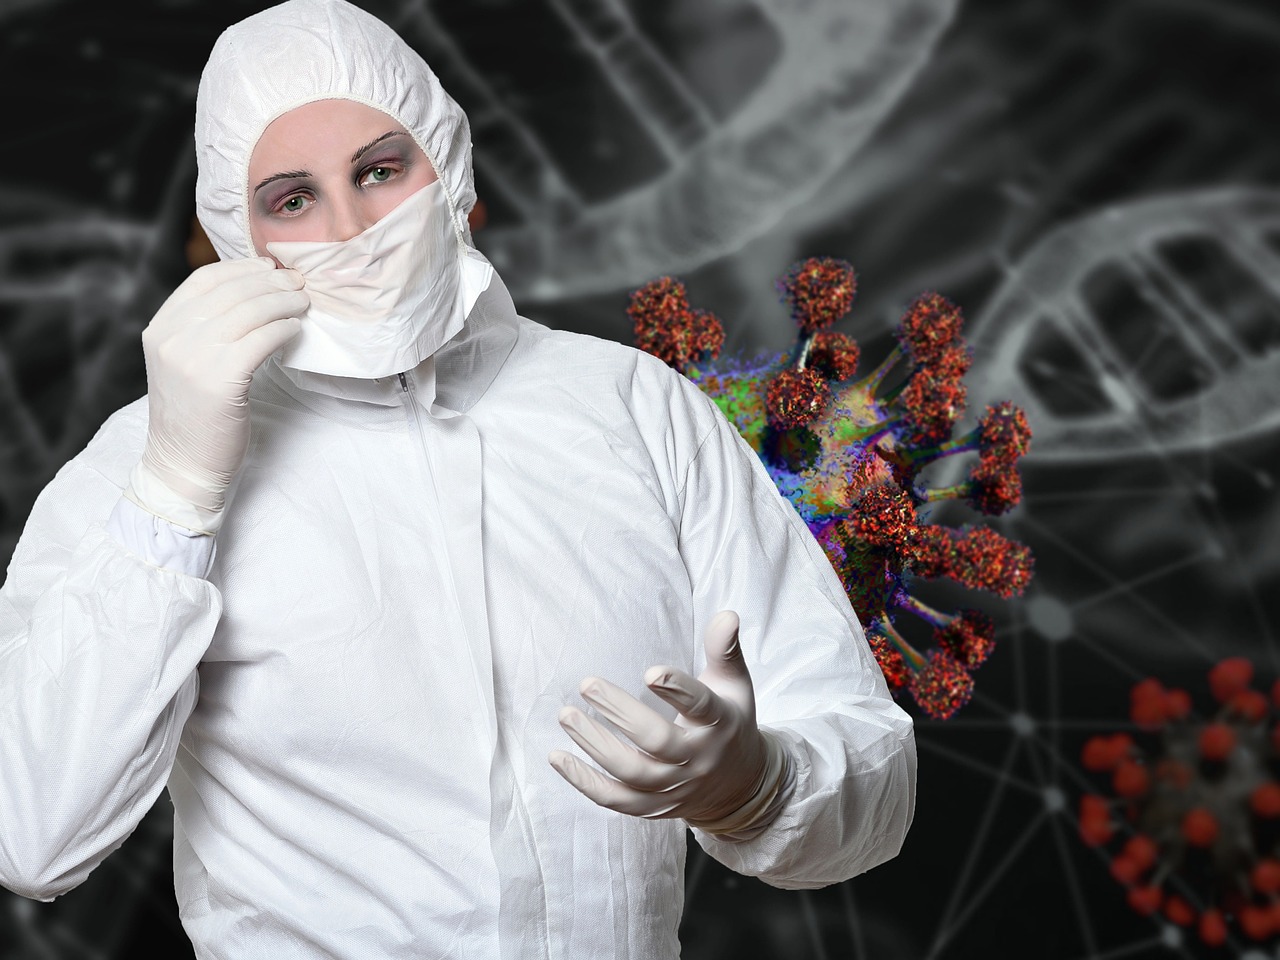 a man in a white lab coat and white gloves, inspired by Igor Morski, shutterstock, poster of corona virus, photograph of a techwear woman, full view with focus on subject, stock photo